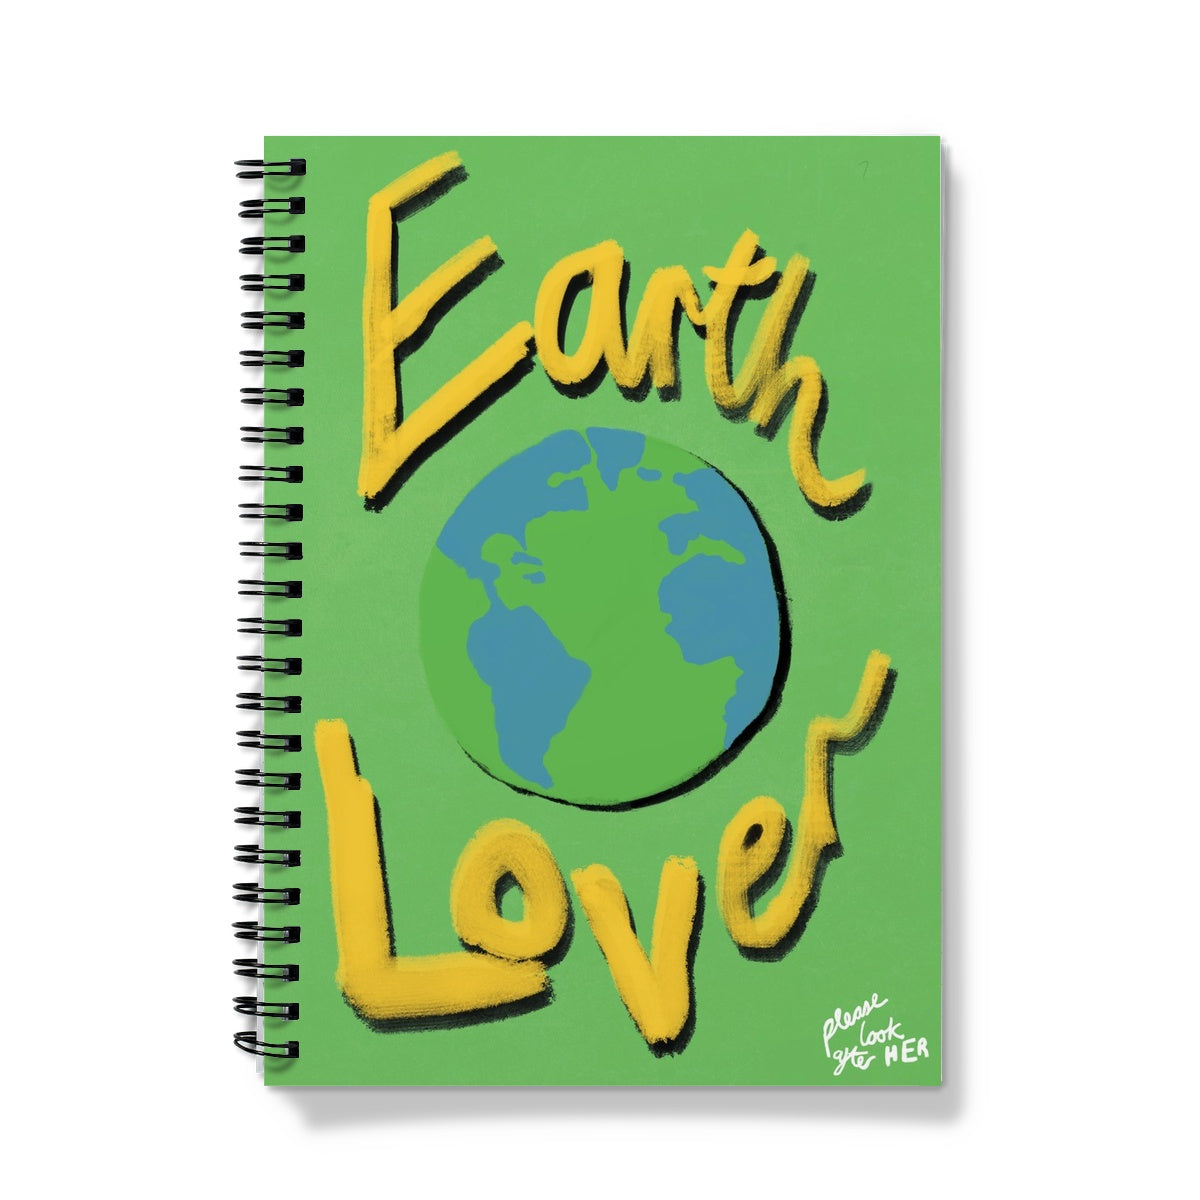 Earth Lover Print - Green, Yellow Notebook